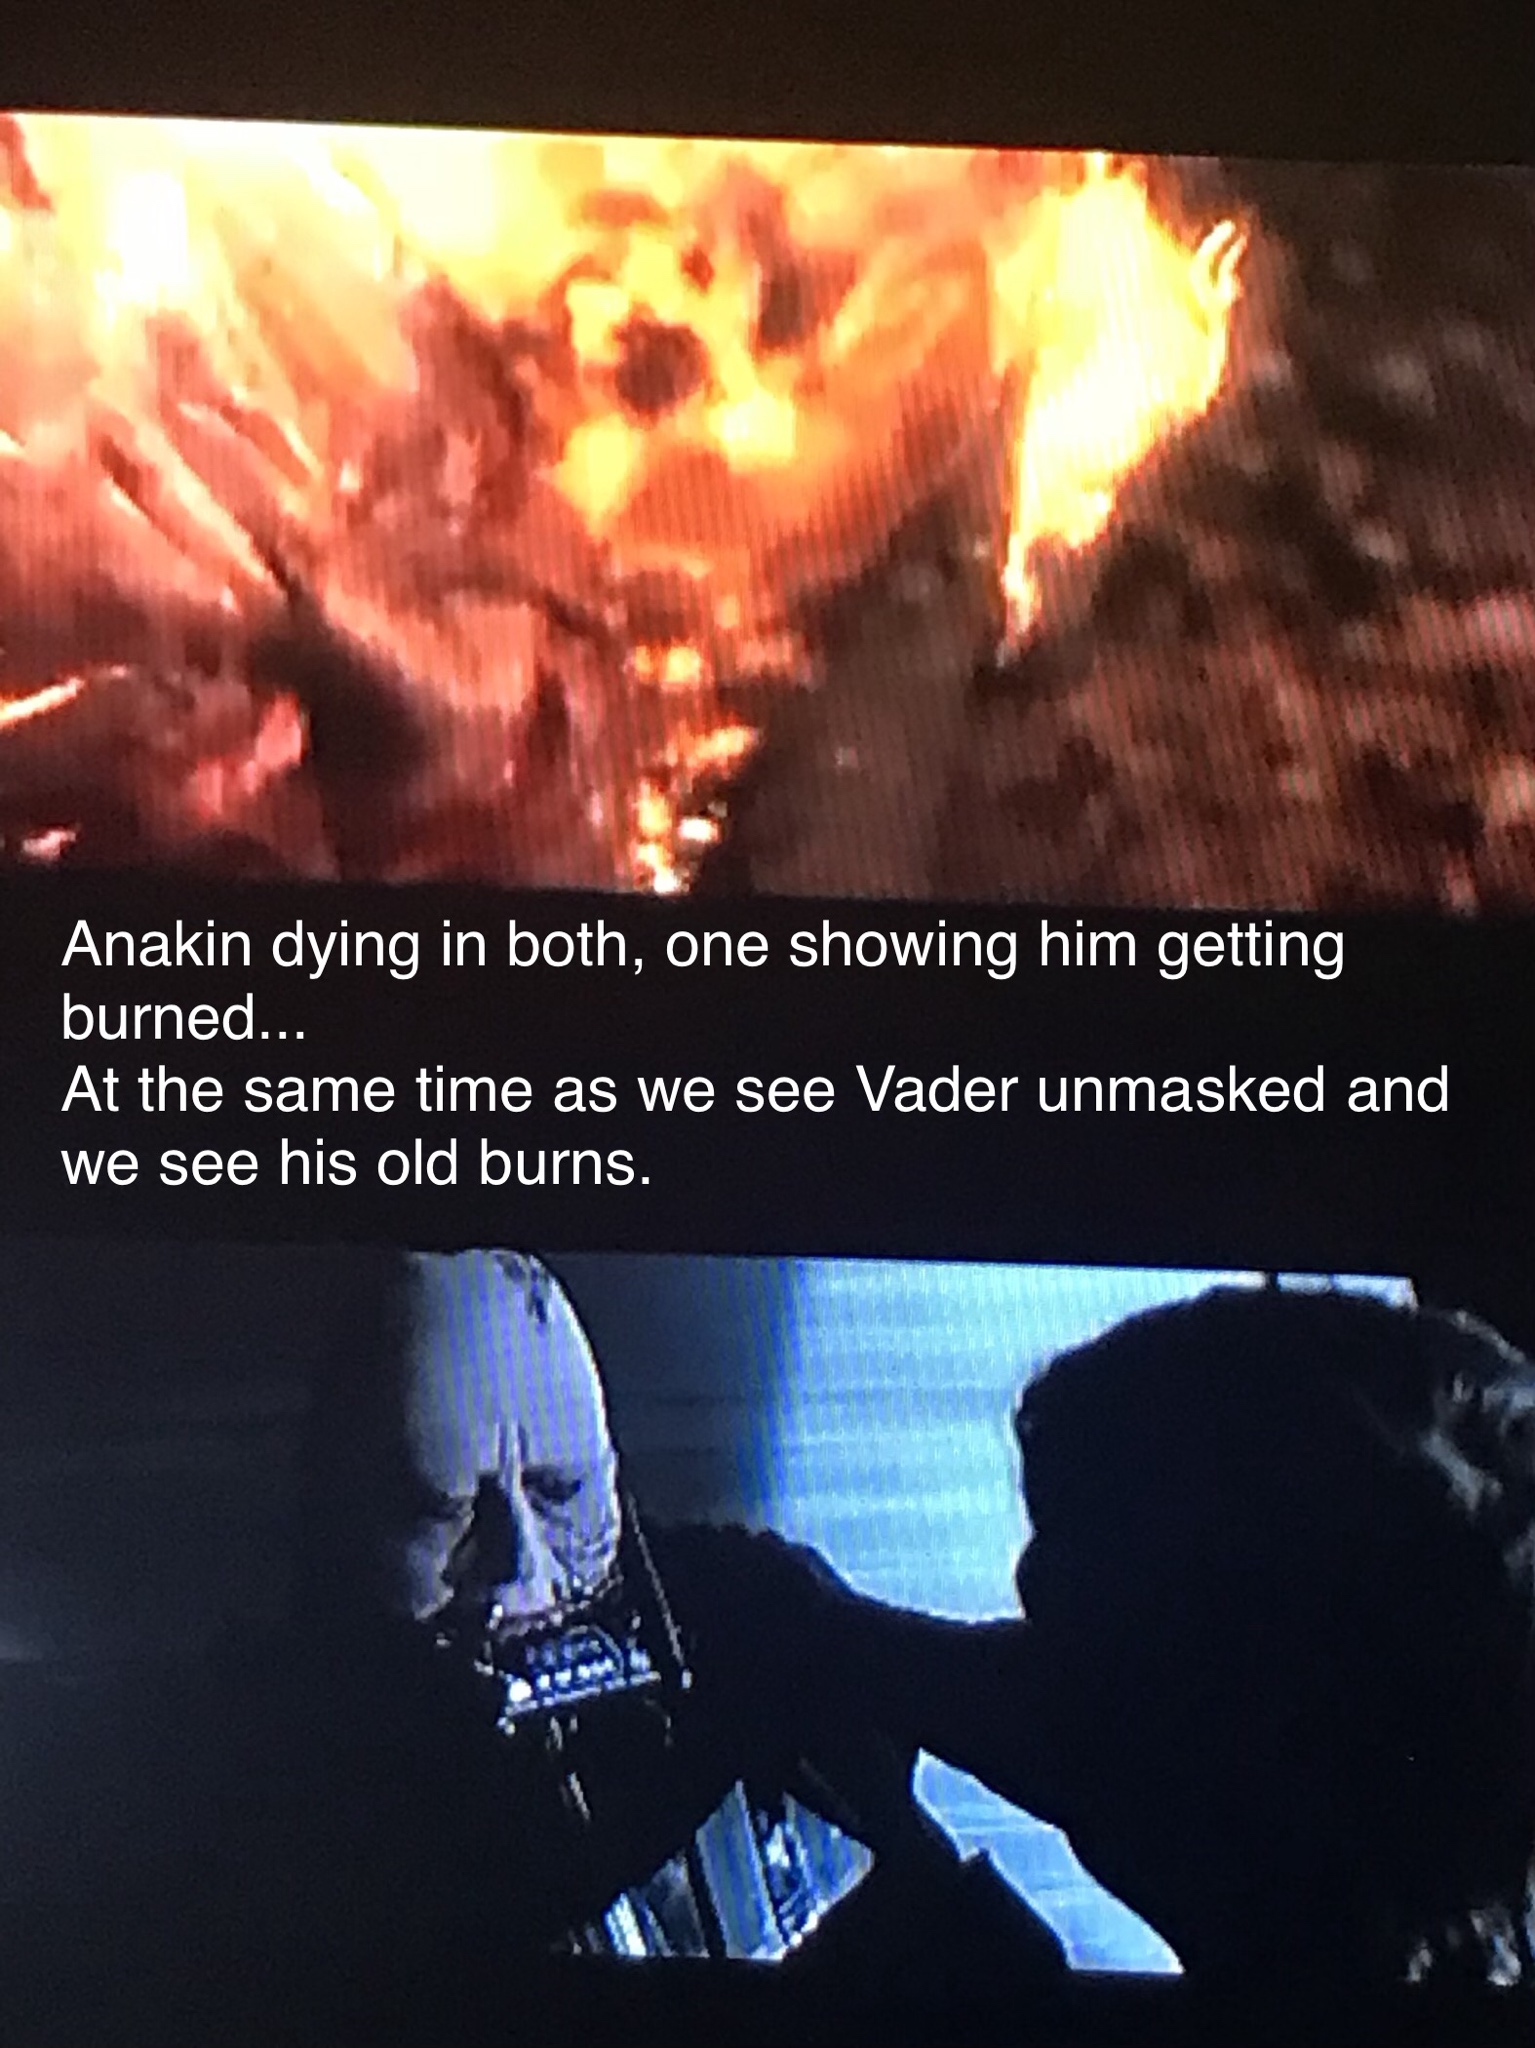 Anakin dying in both, one showing him getting burned... At the same time as we see Vader unmasked and we see his old burns.